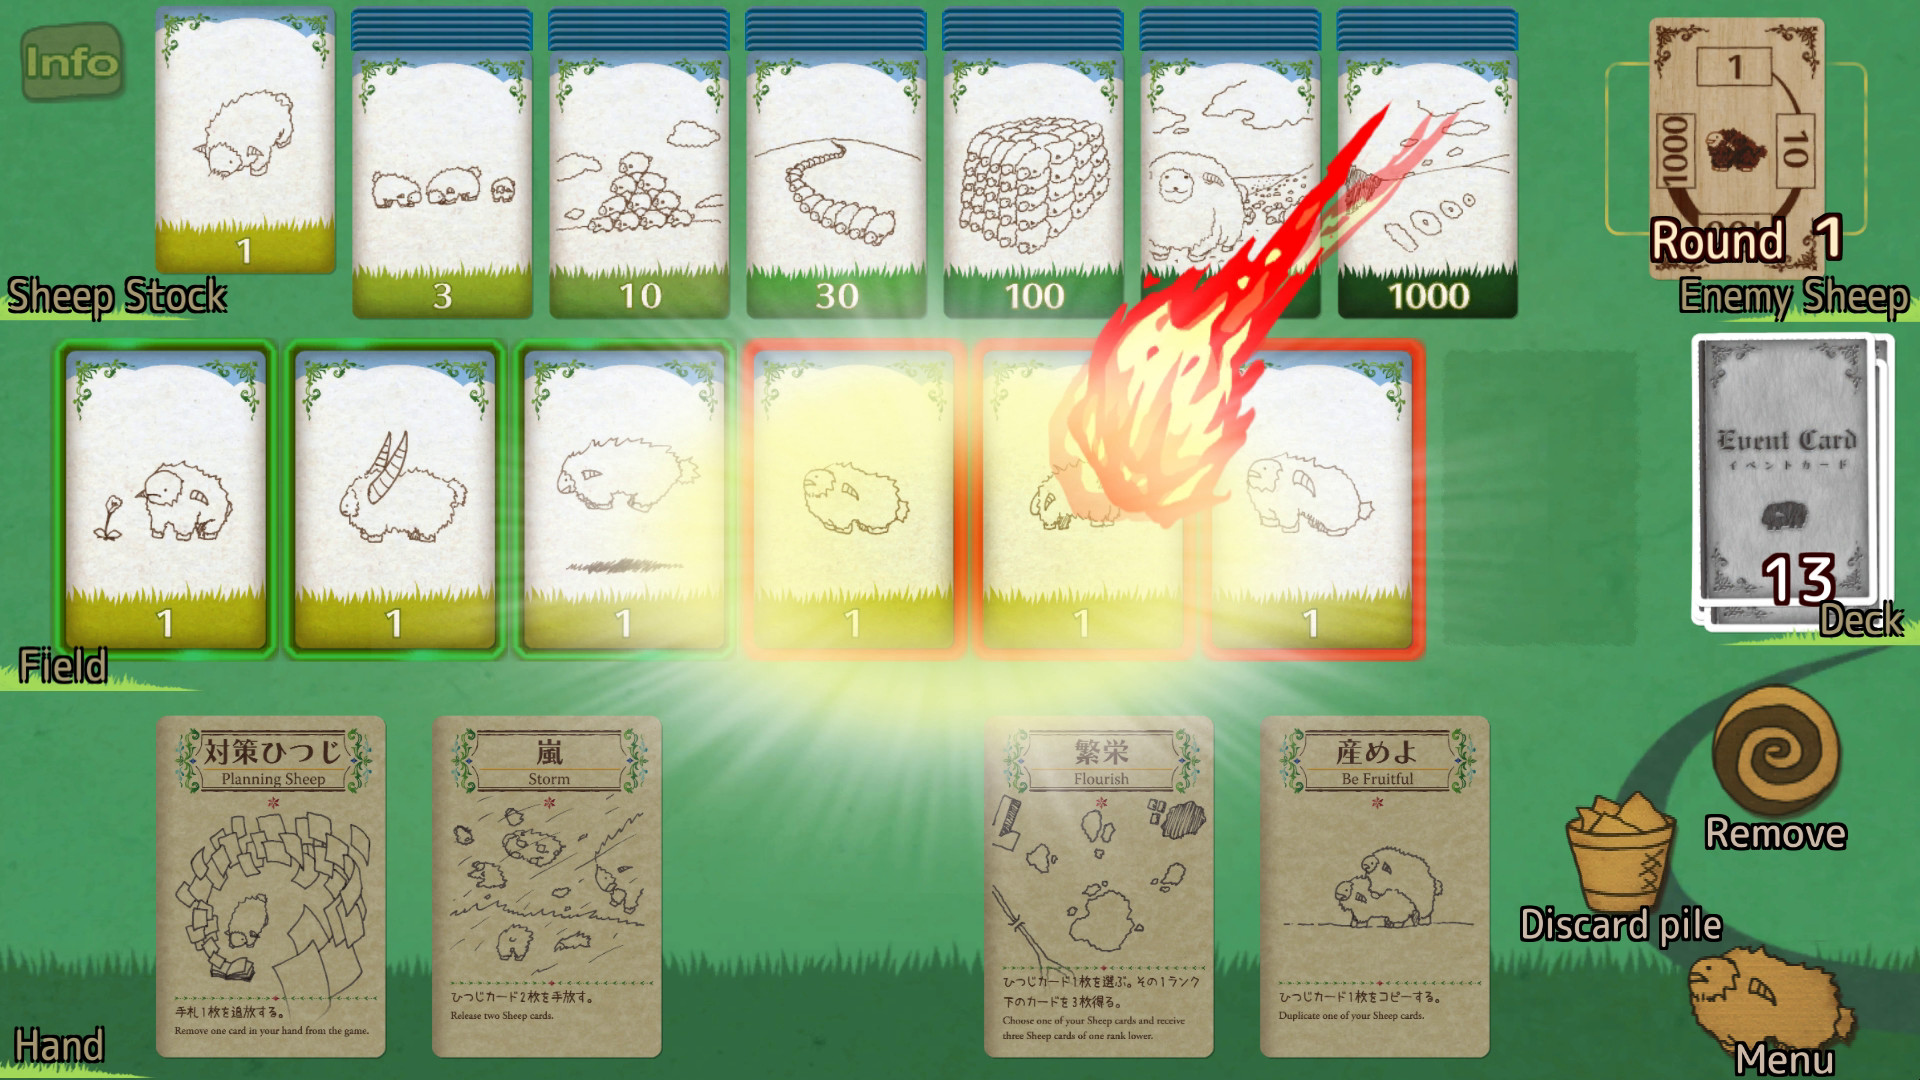 Arc System Works’ Sheep Based Solitaire Card Game Shephy Available on Steam